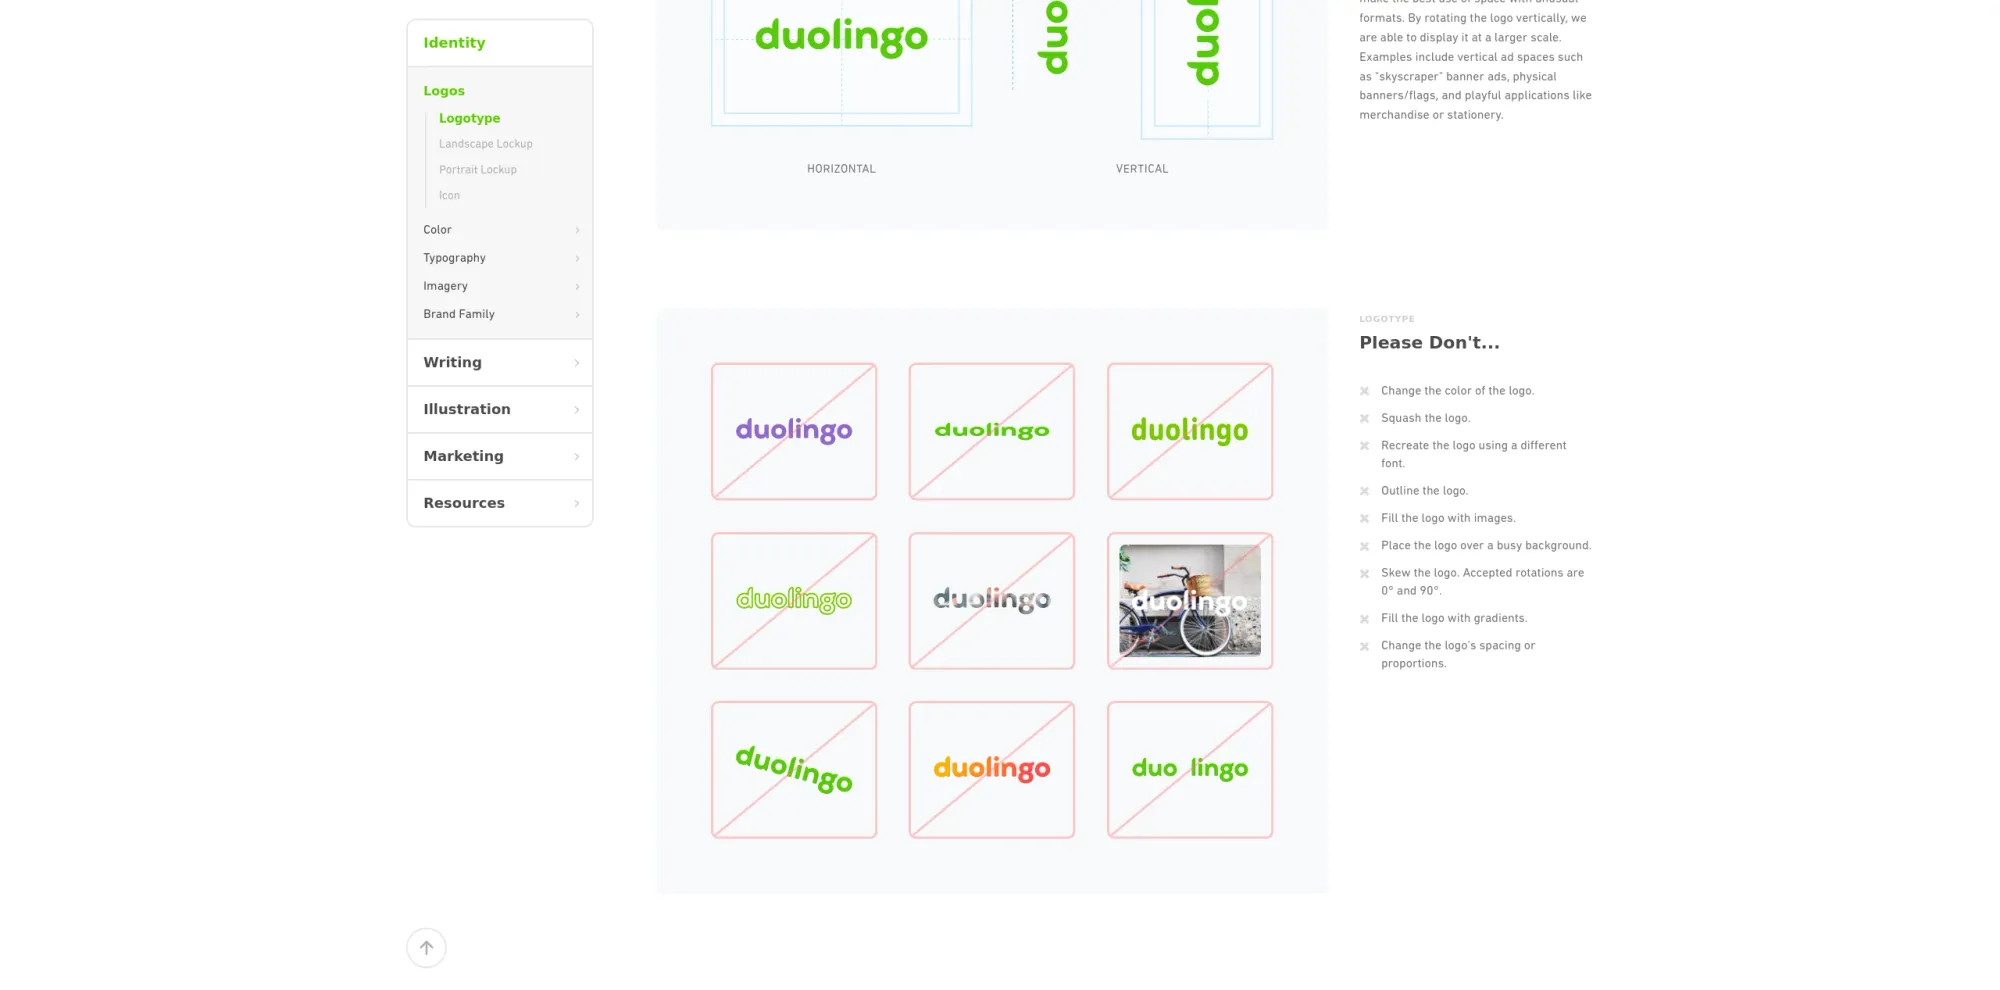 Example of style guide - Duolingo design guidelines site 